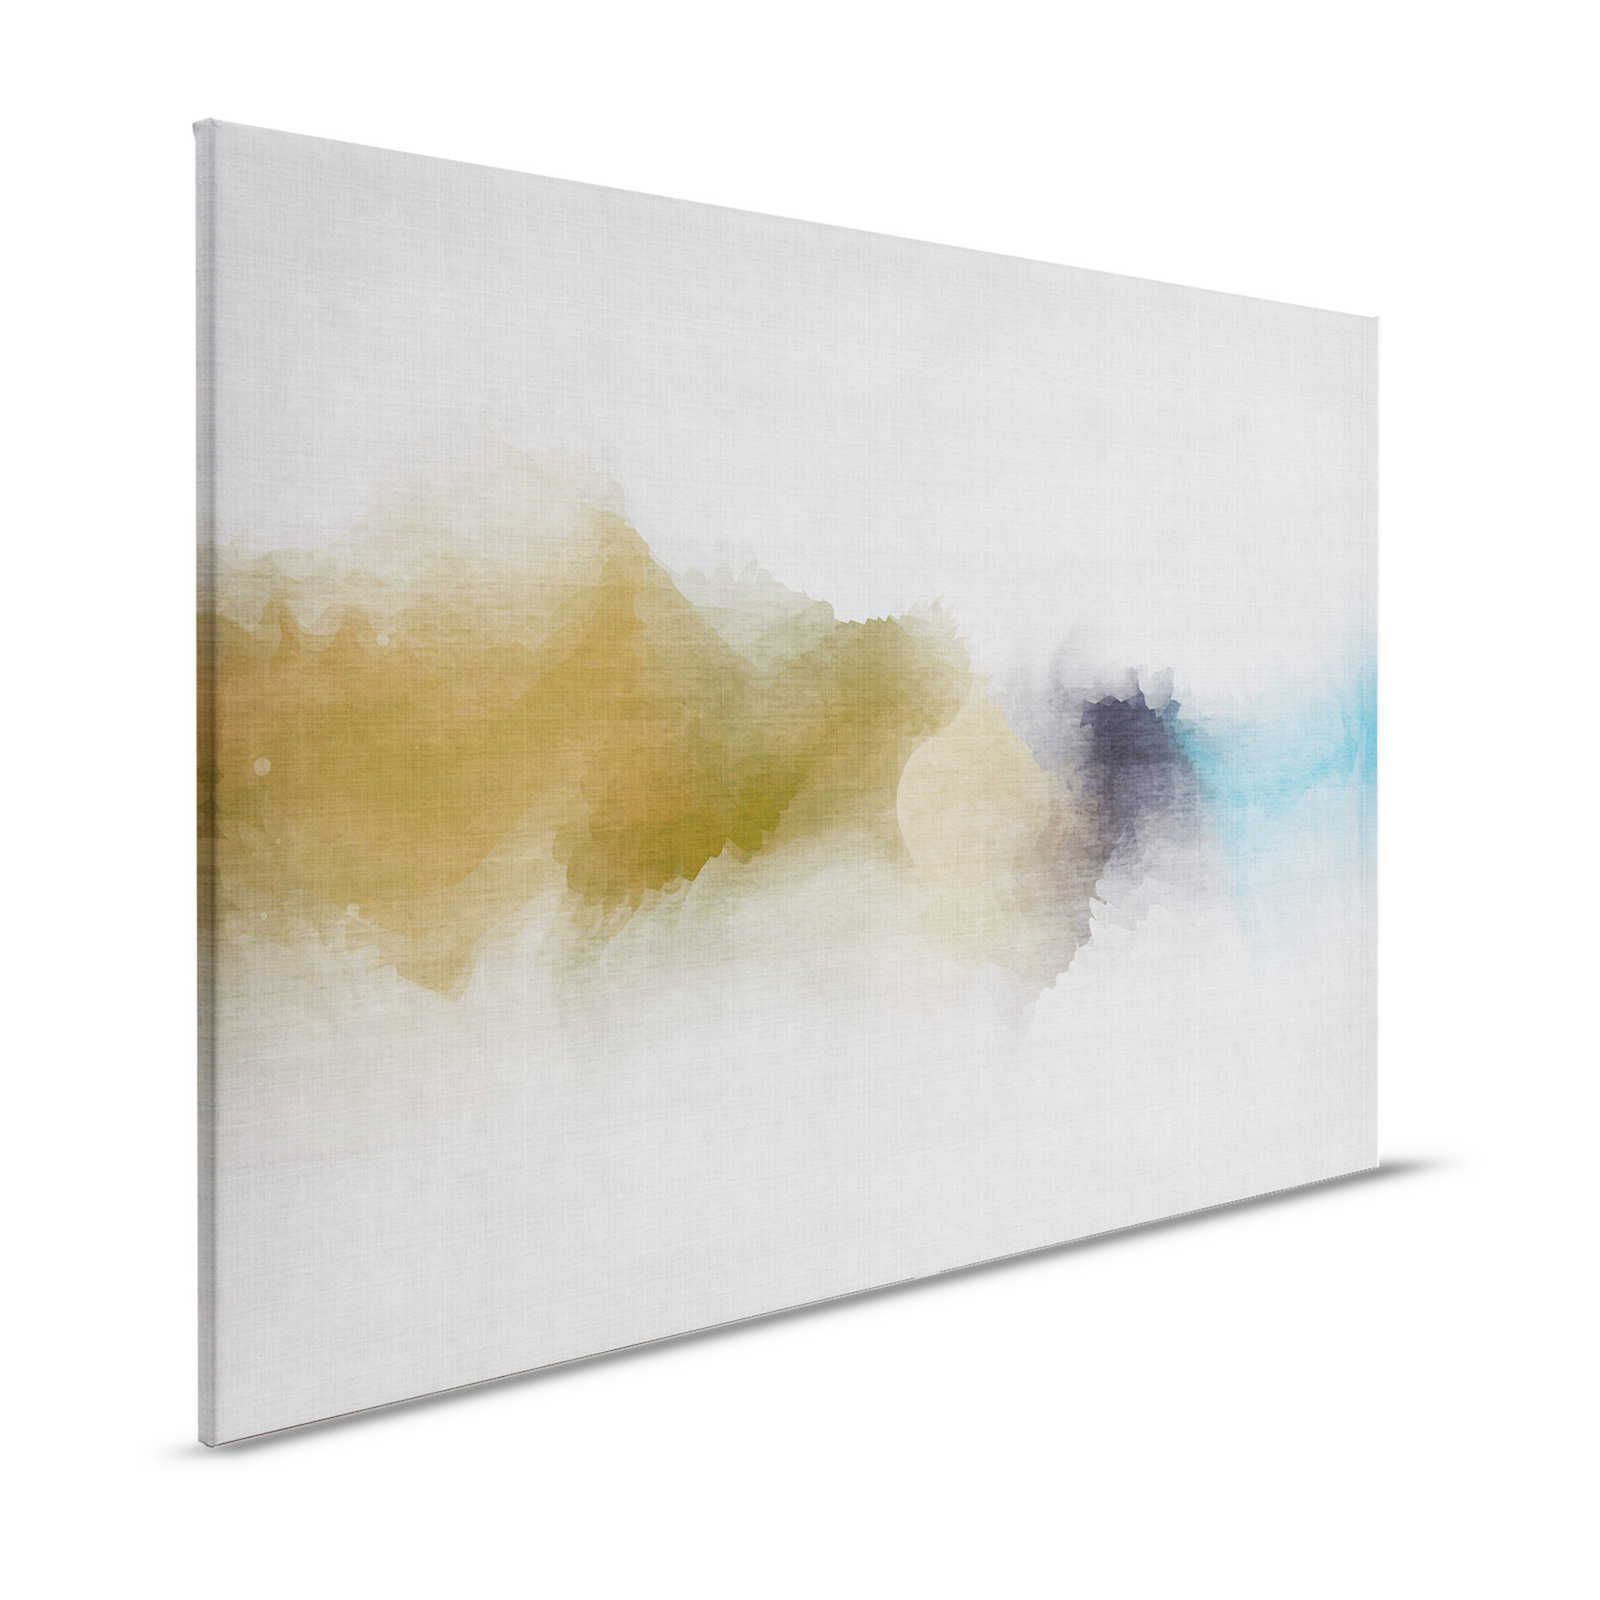 Daydream 3 - Canvas painting cloudy watercolour pattern- natural linen look - 1.20 m x 0.80 m
